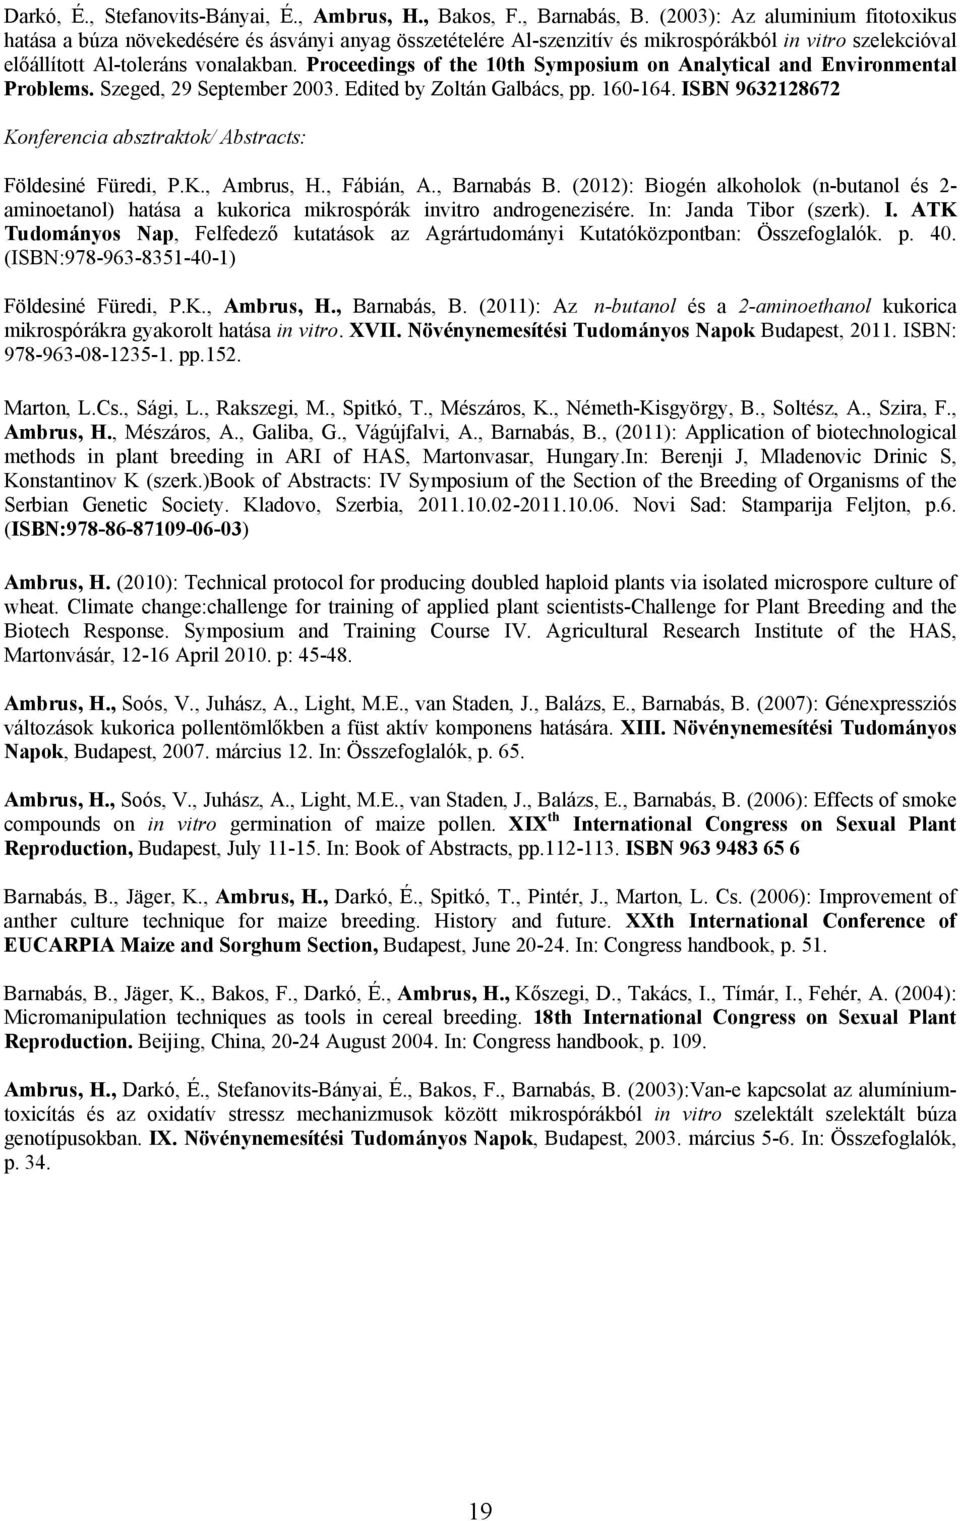 Proceedings of the 10th Symposium on Analytical and Environmental Problems. Szeged, 29 September 2003. Edited by Zoltán Galbács, pp. 160-164.